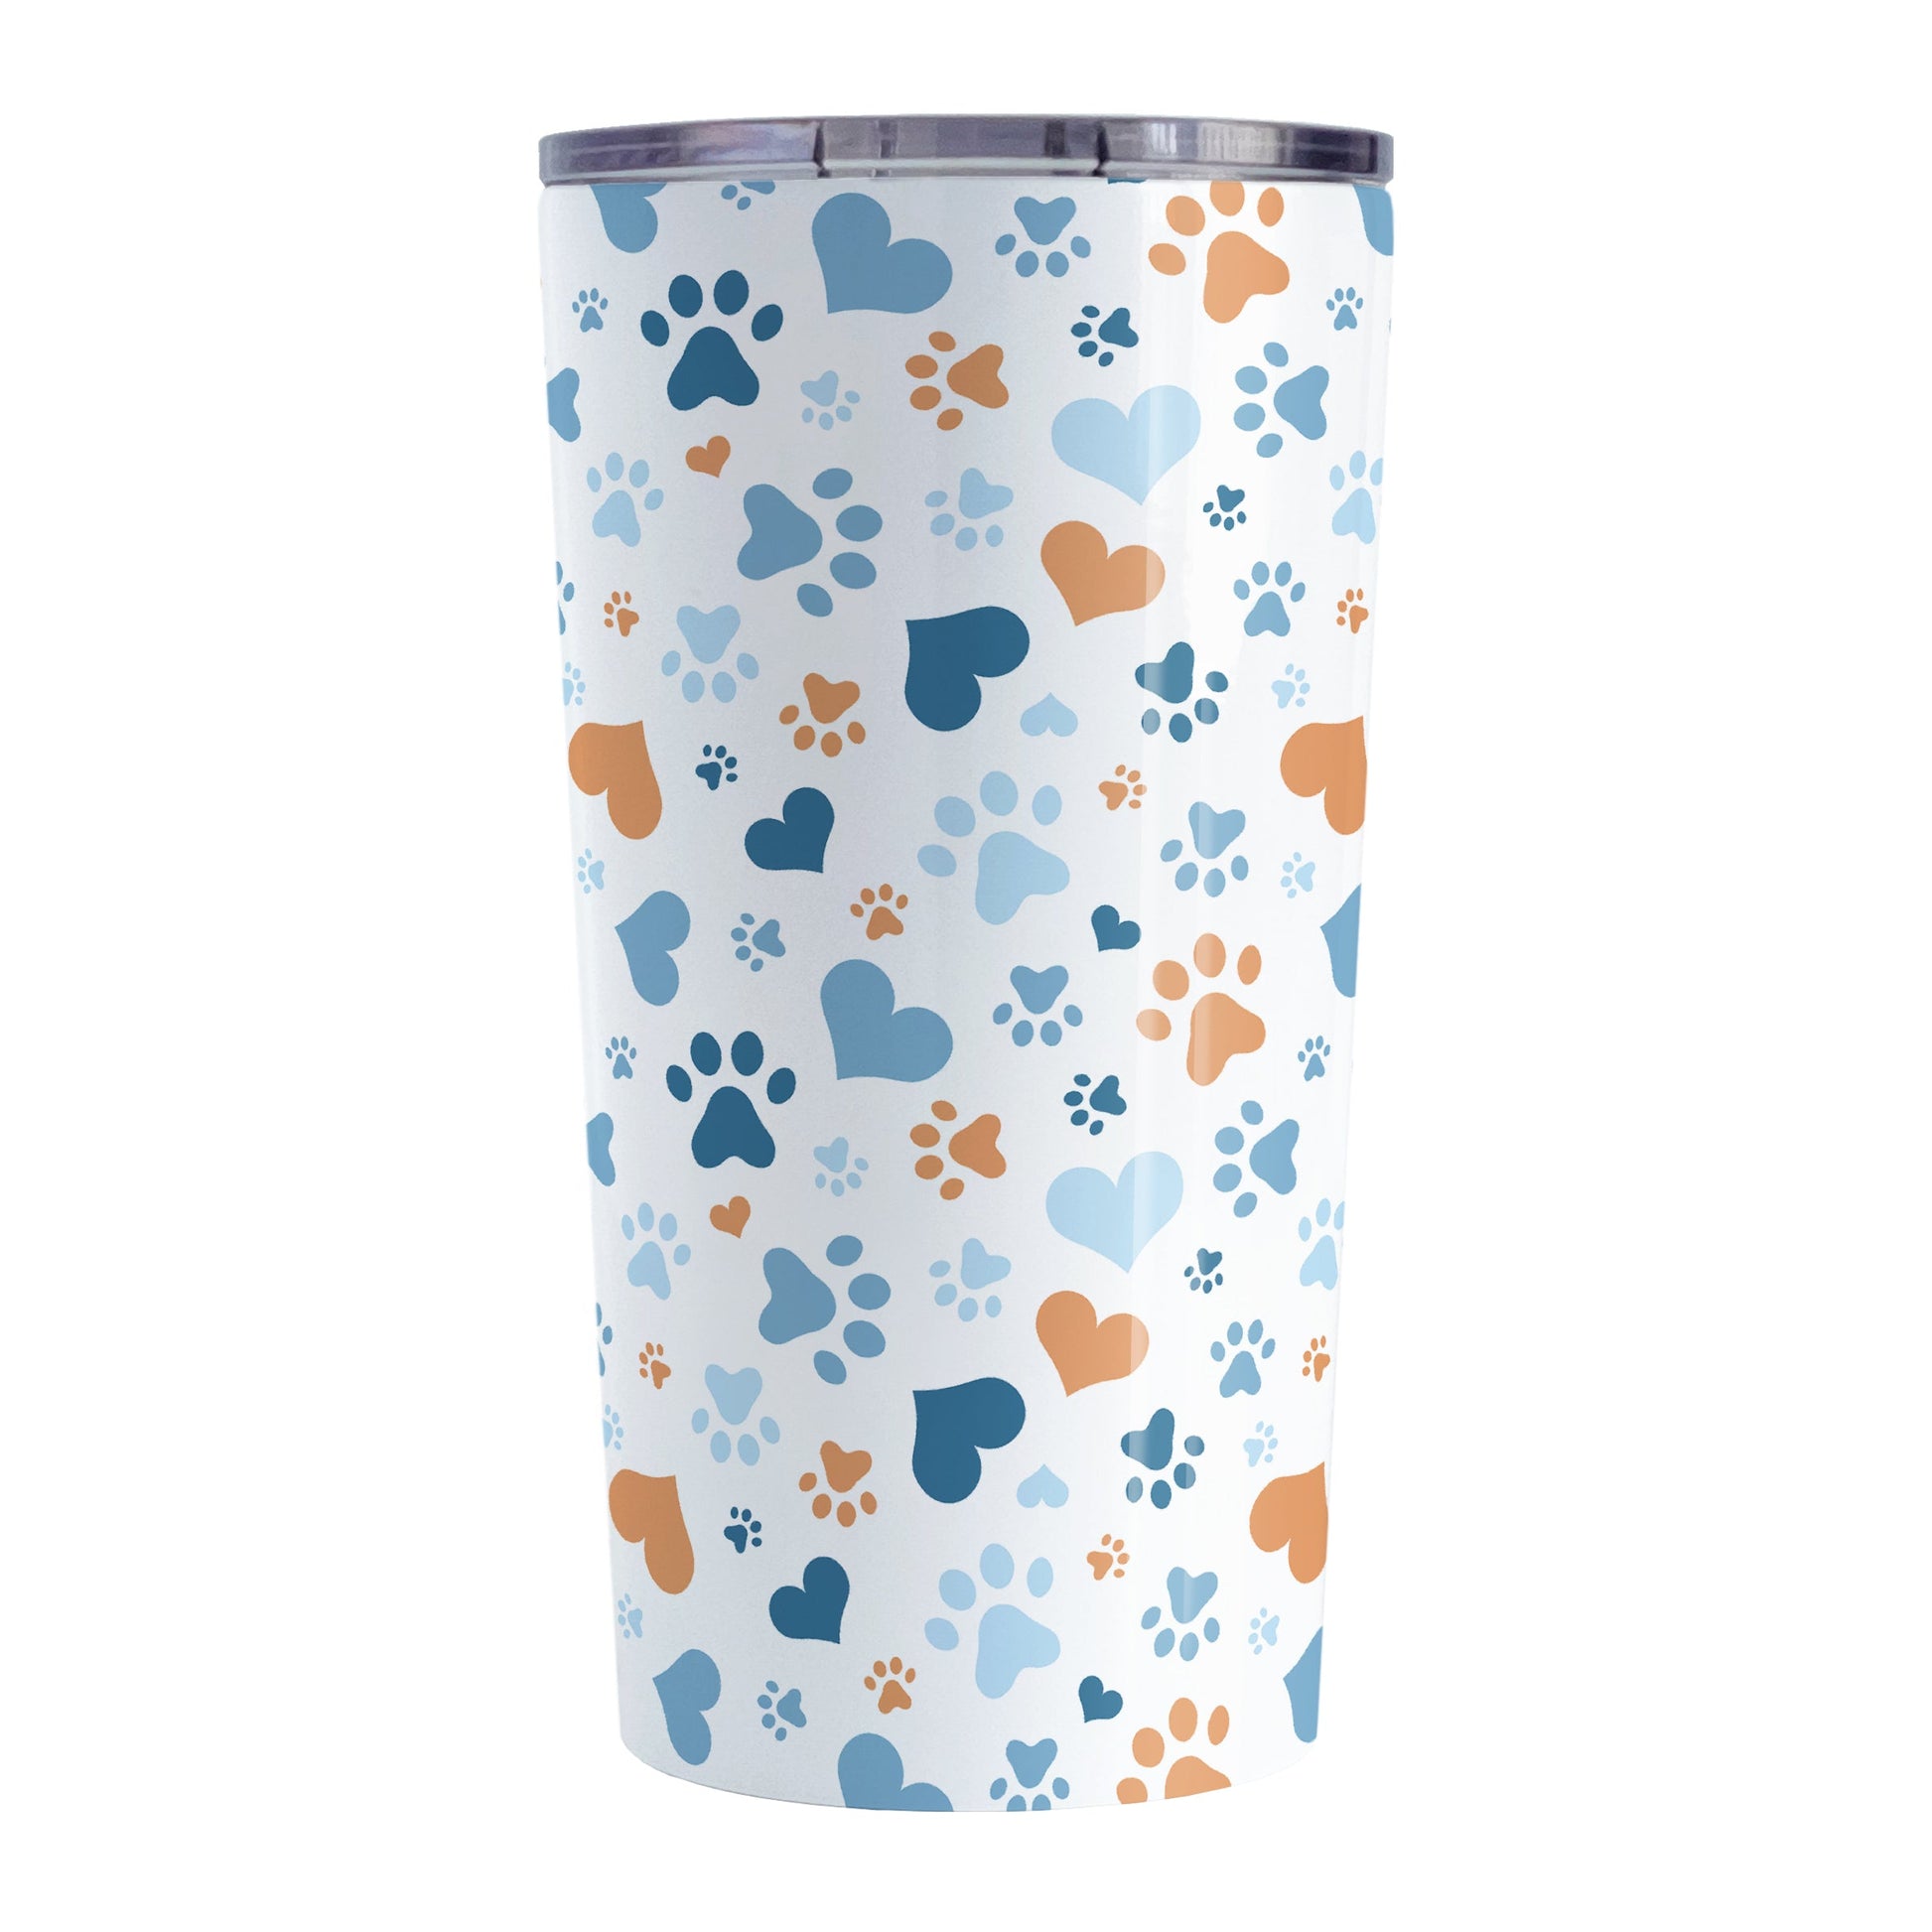 Blue Hearts and Paw Prints Tumbler Cup (20oz) at Amy's Coffee Mugs. A stainless steel insulated tumbler cup designed with a pattern of hearts and paw prints in orange and different shades of blue that wraps around the cup. This tumbler cup is perfect for people love dogs and cute paw print designs.